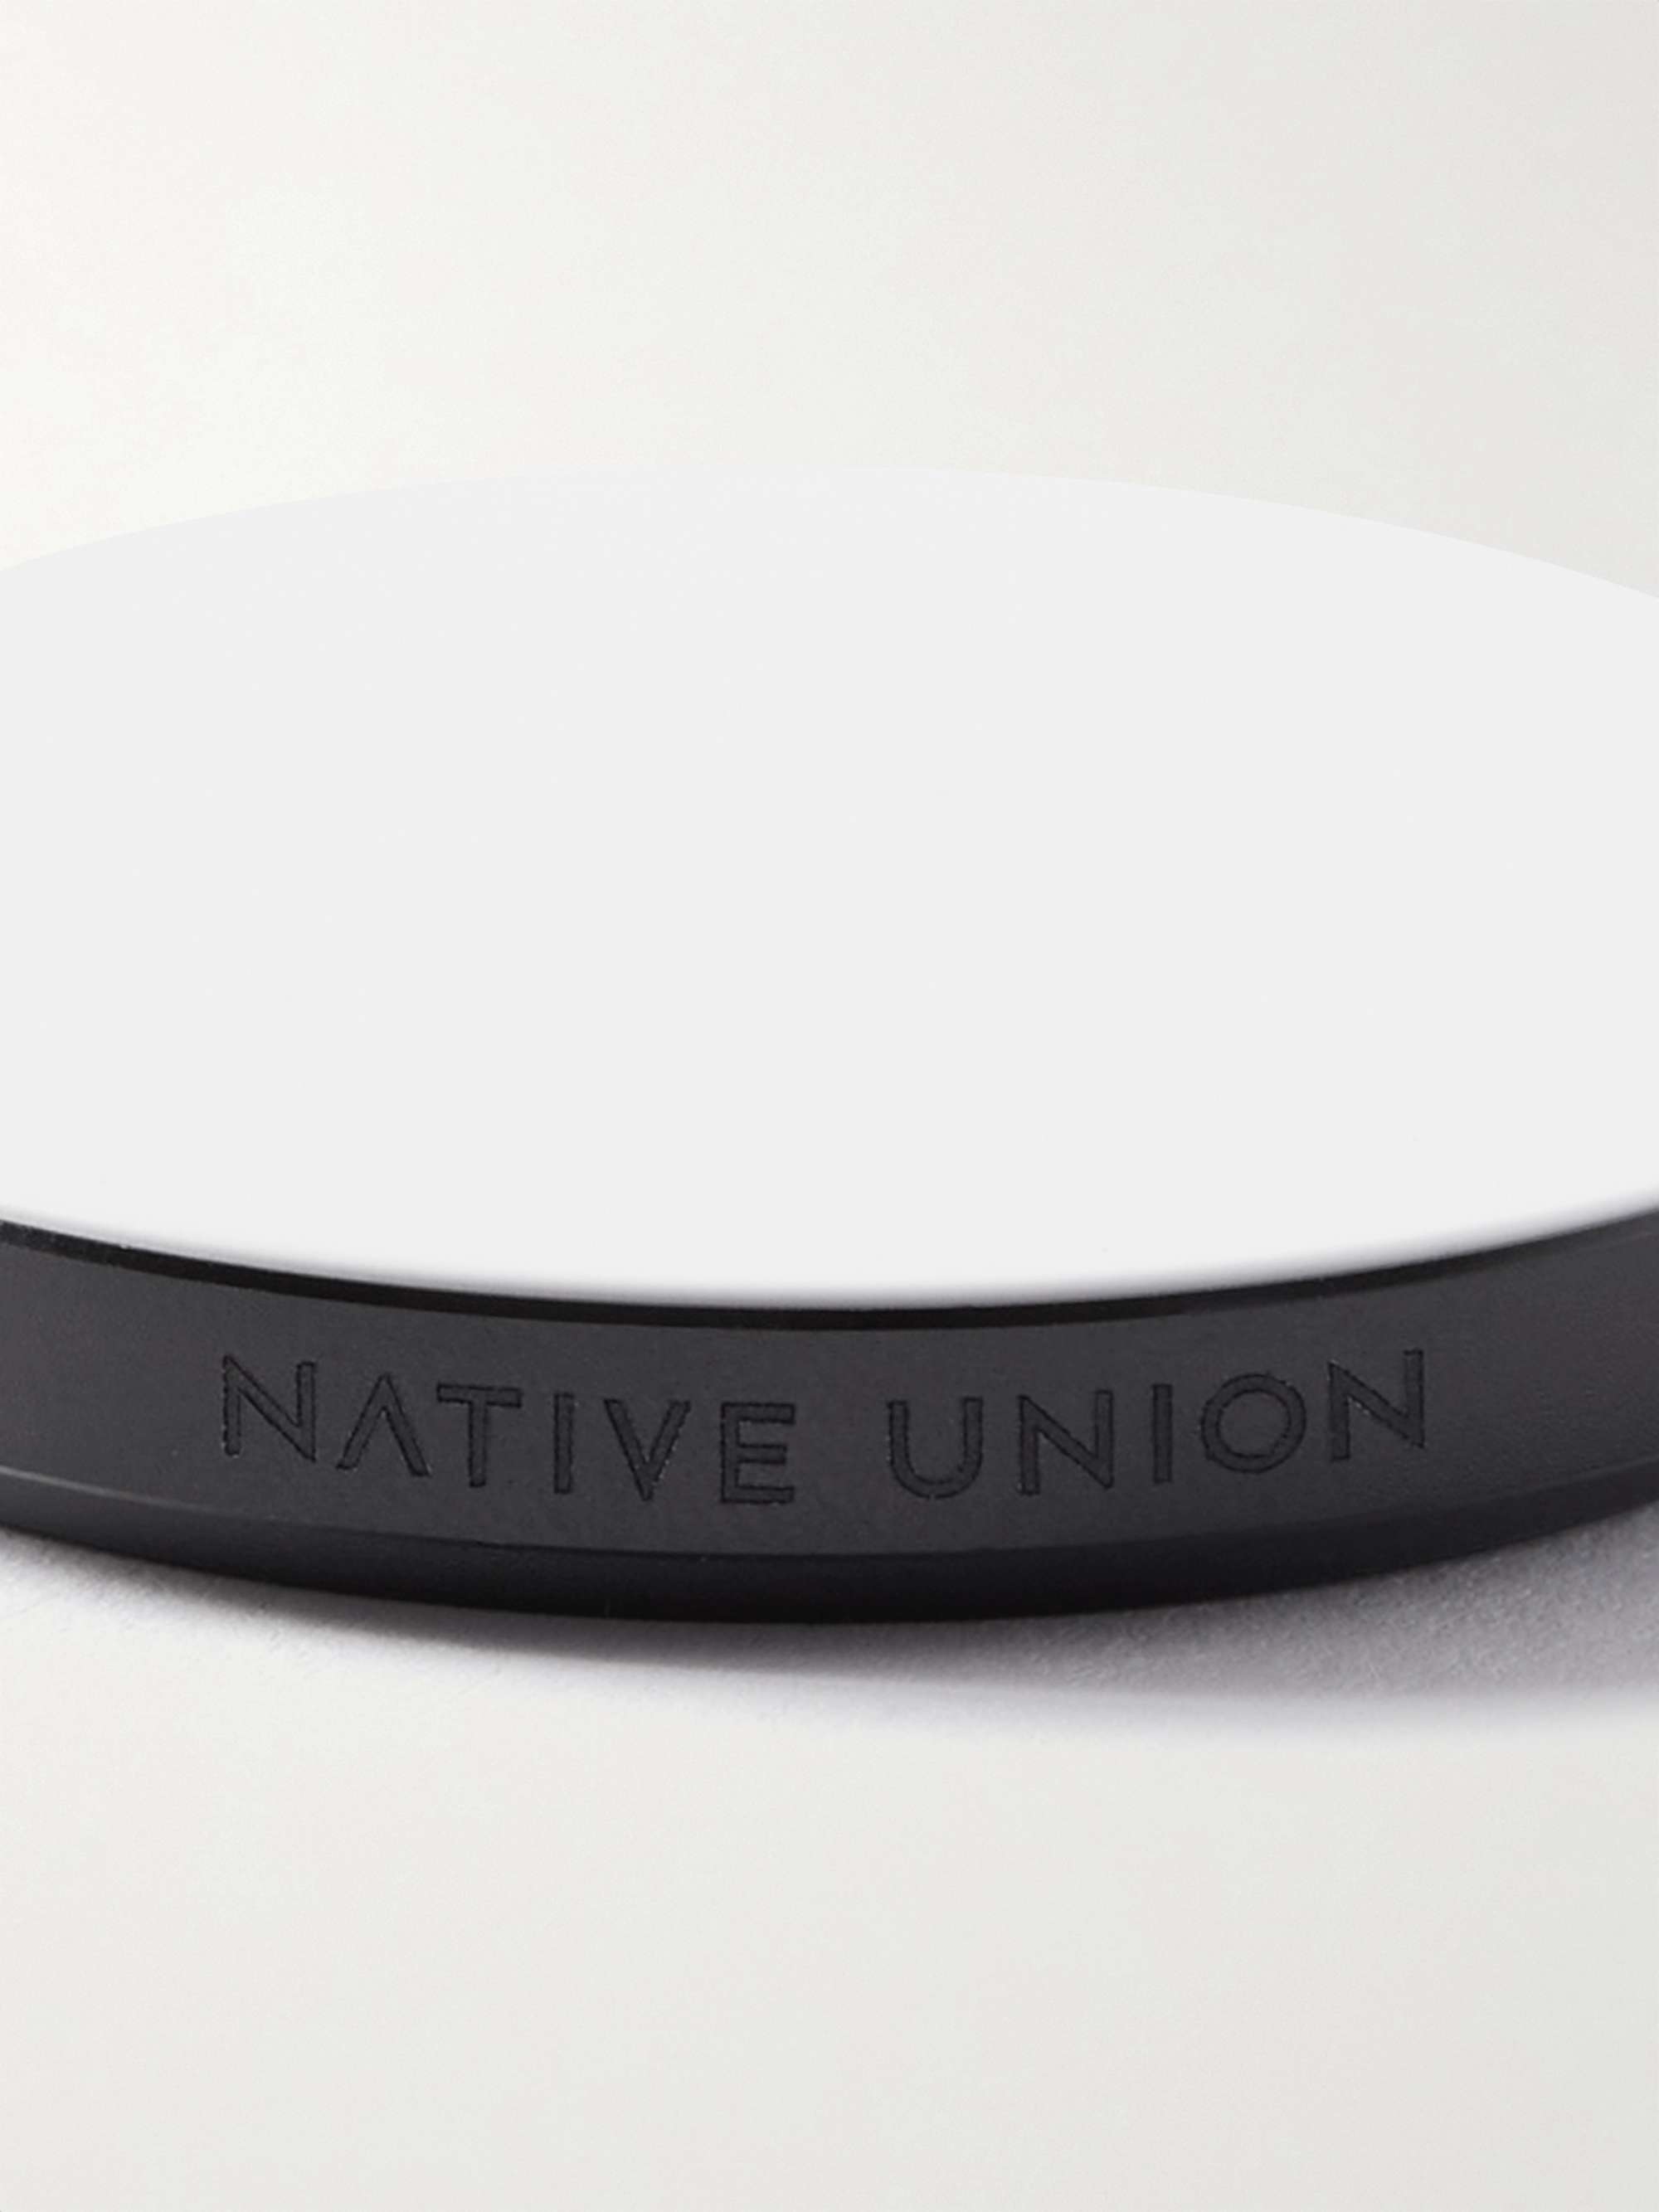 NATIVE UNION Snap MagSafe Wireless Charger